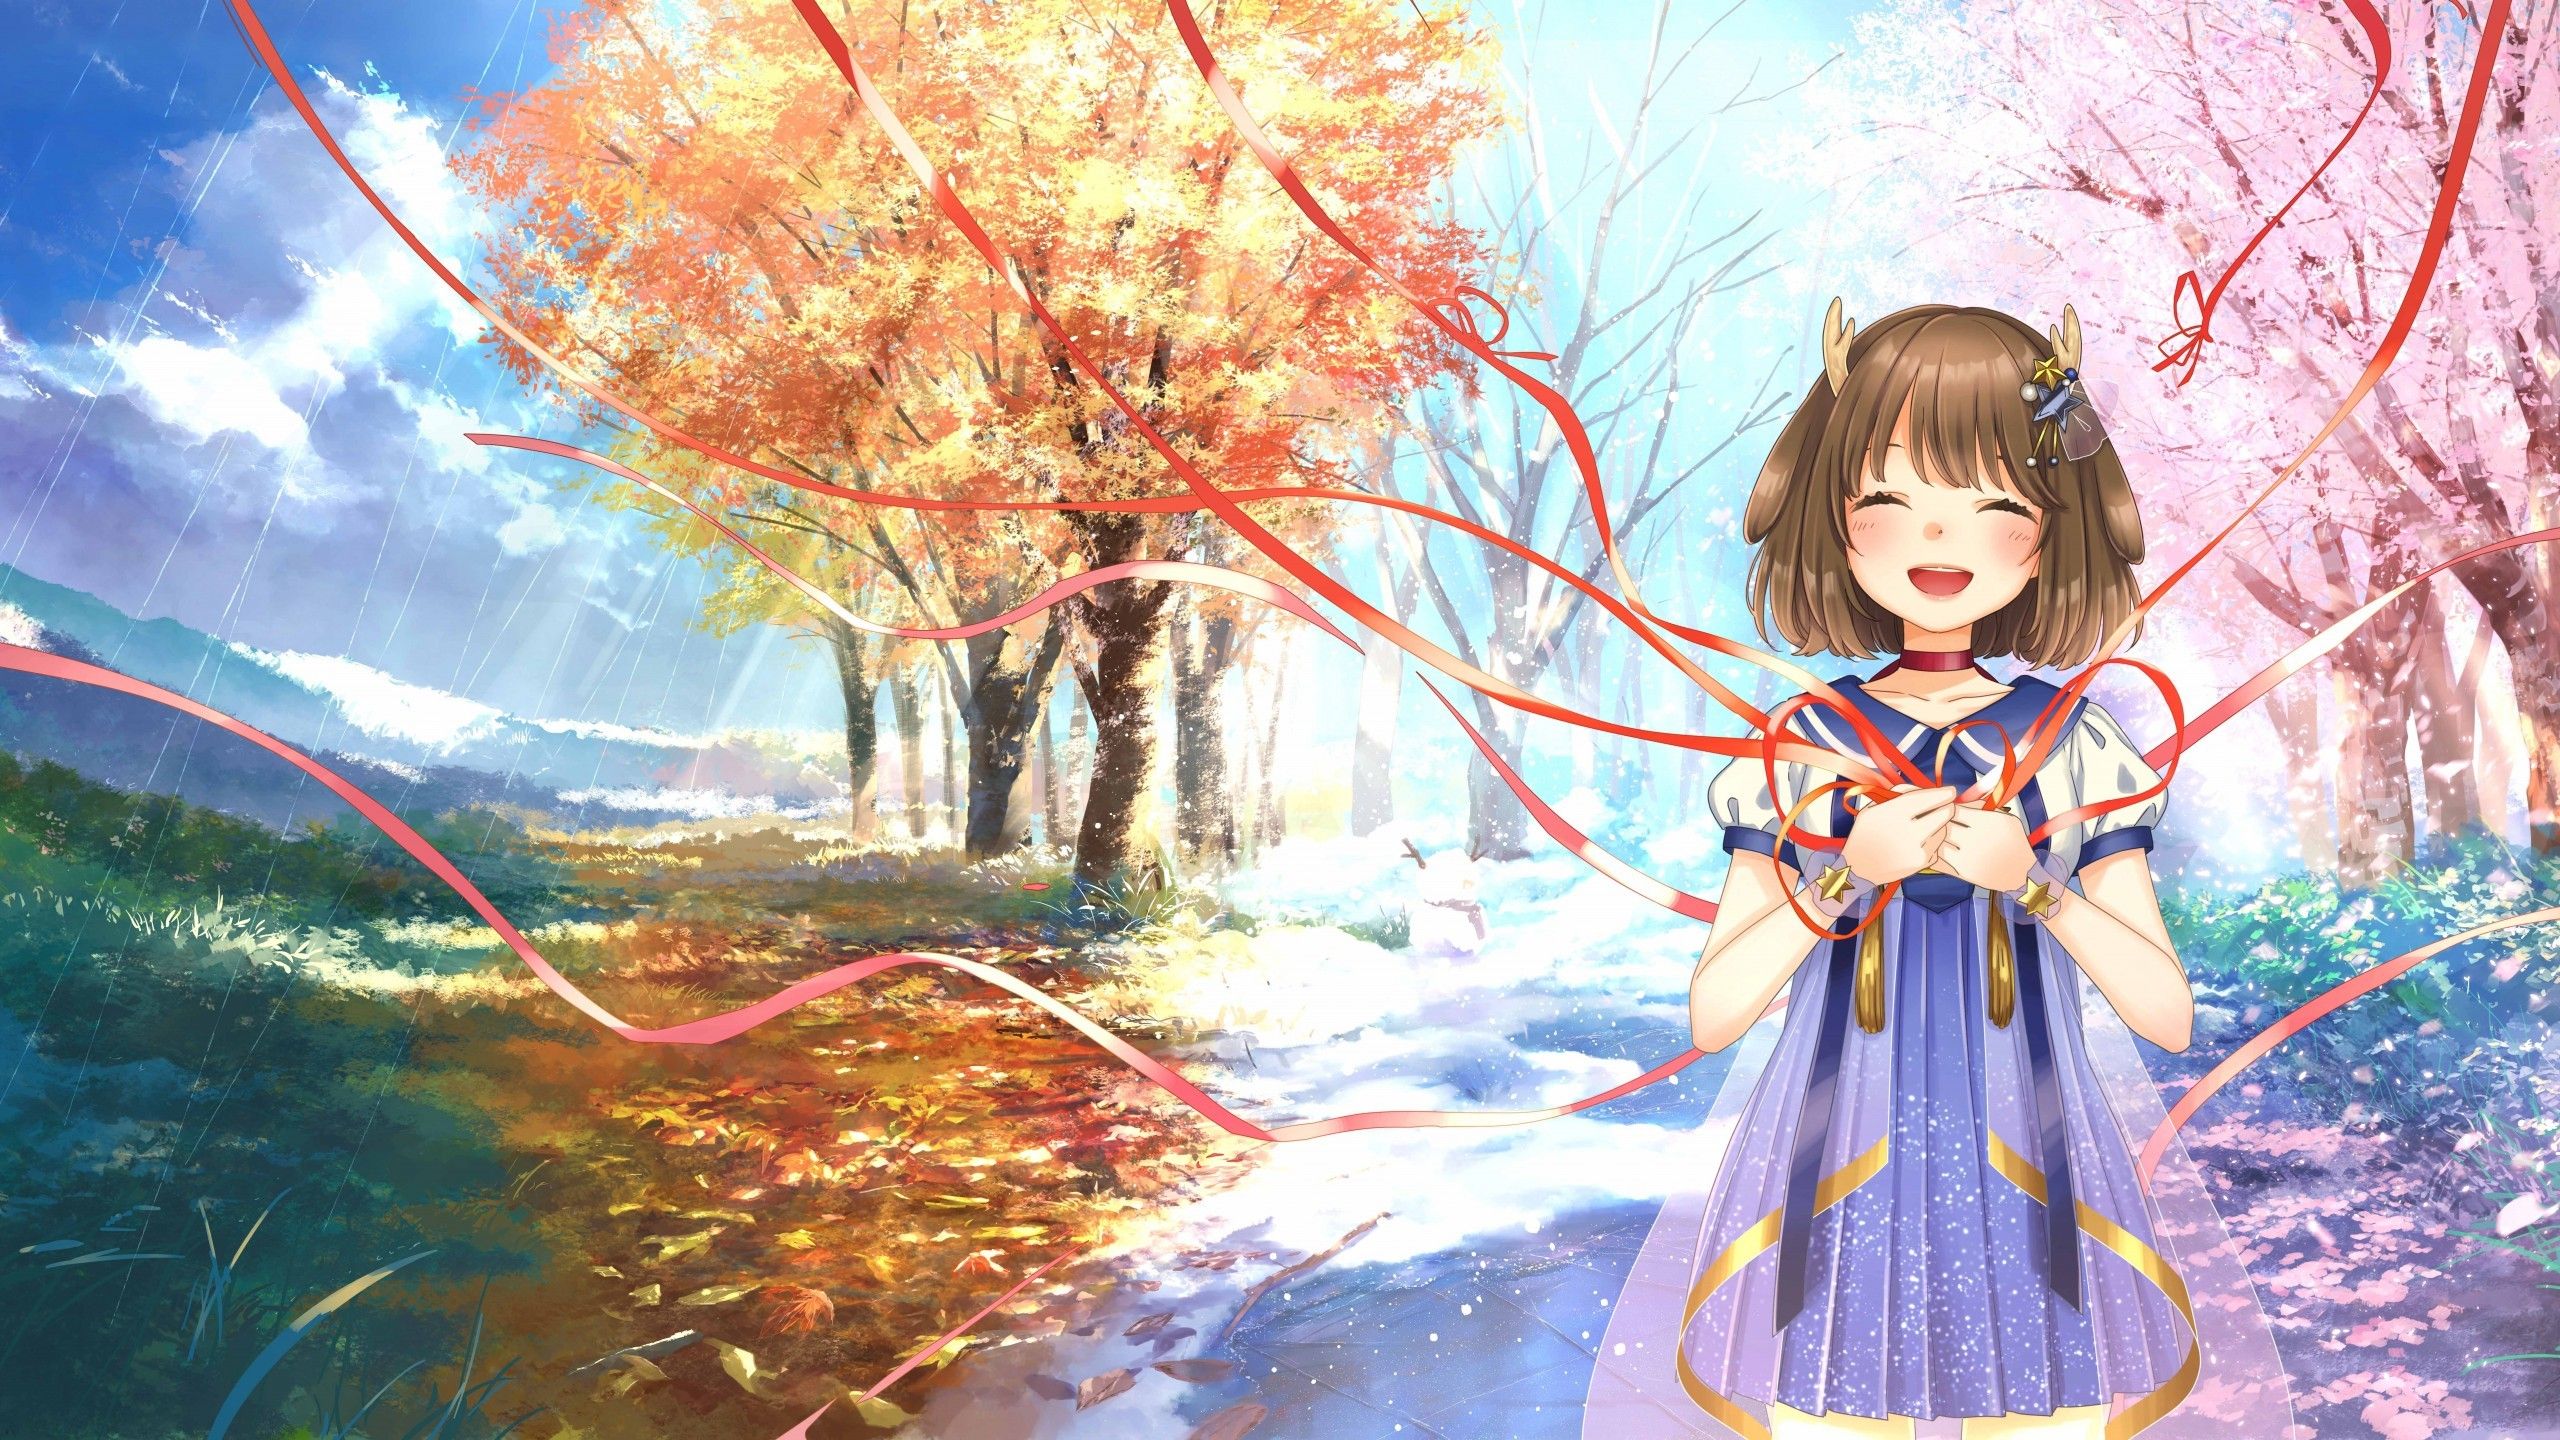 Download 2560x1440 Anime Landscape, Four Seasons, Cute Anime Girl, Autumn, Winter, Spring, Summer Wallpaper for iMac 27 inch